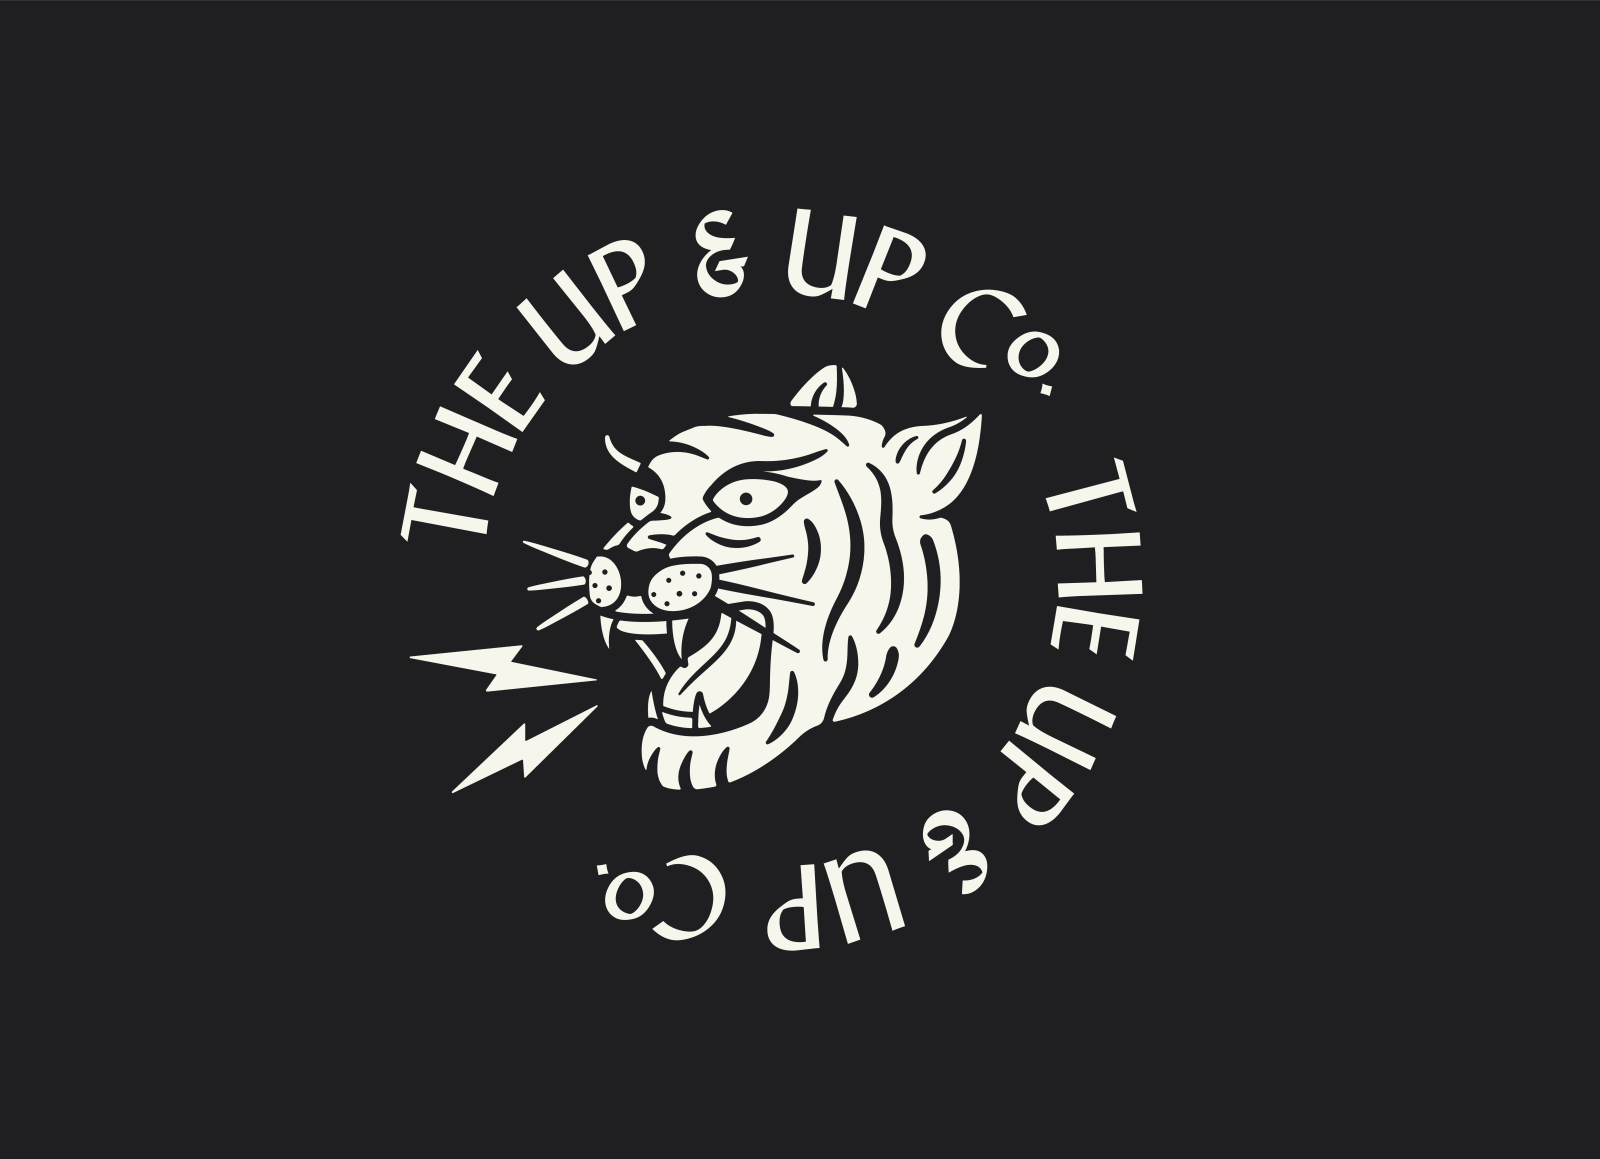 The Up & Up Co. Tiger company up and up black white palette tongue whiskers options stripes growl lightning procreate tiger illustration badge